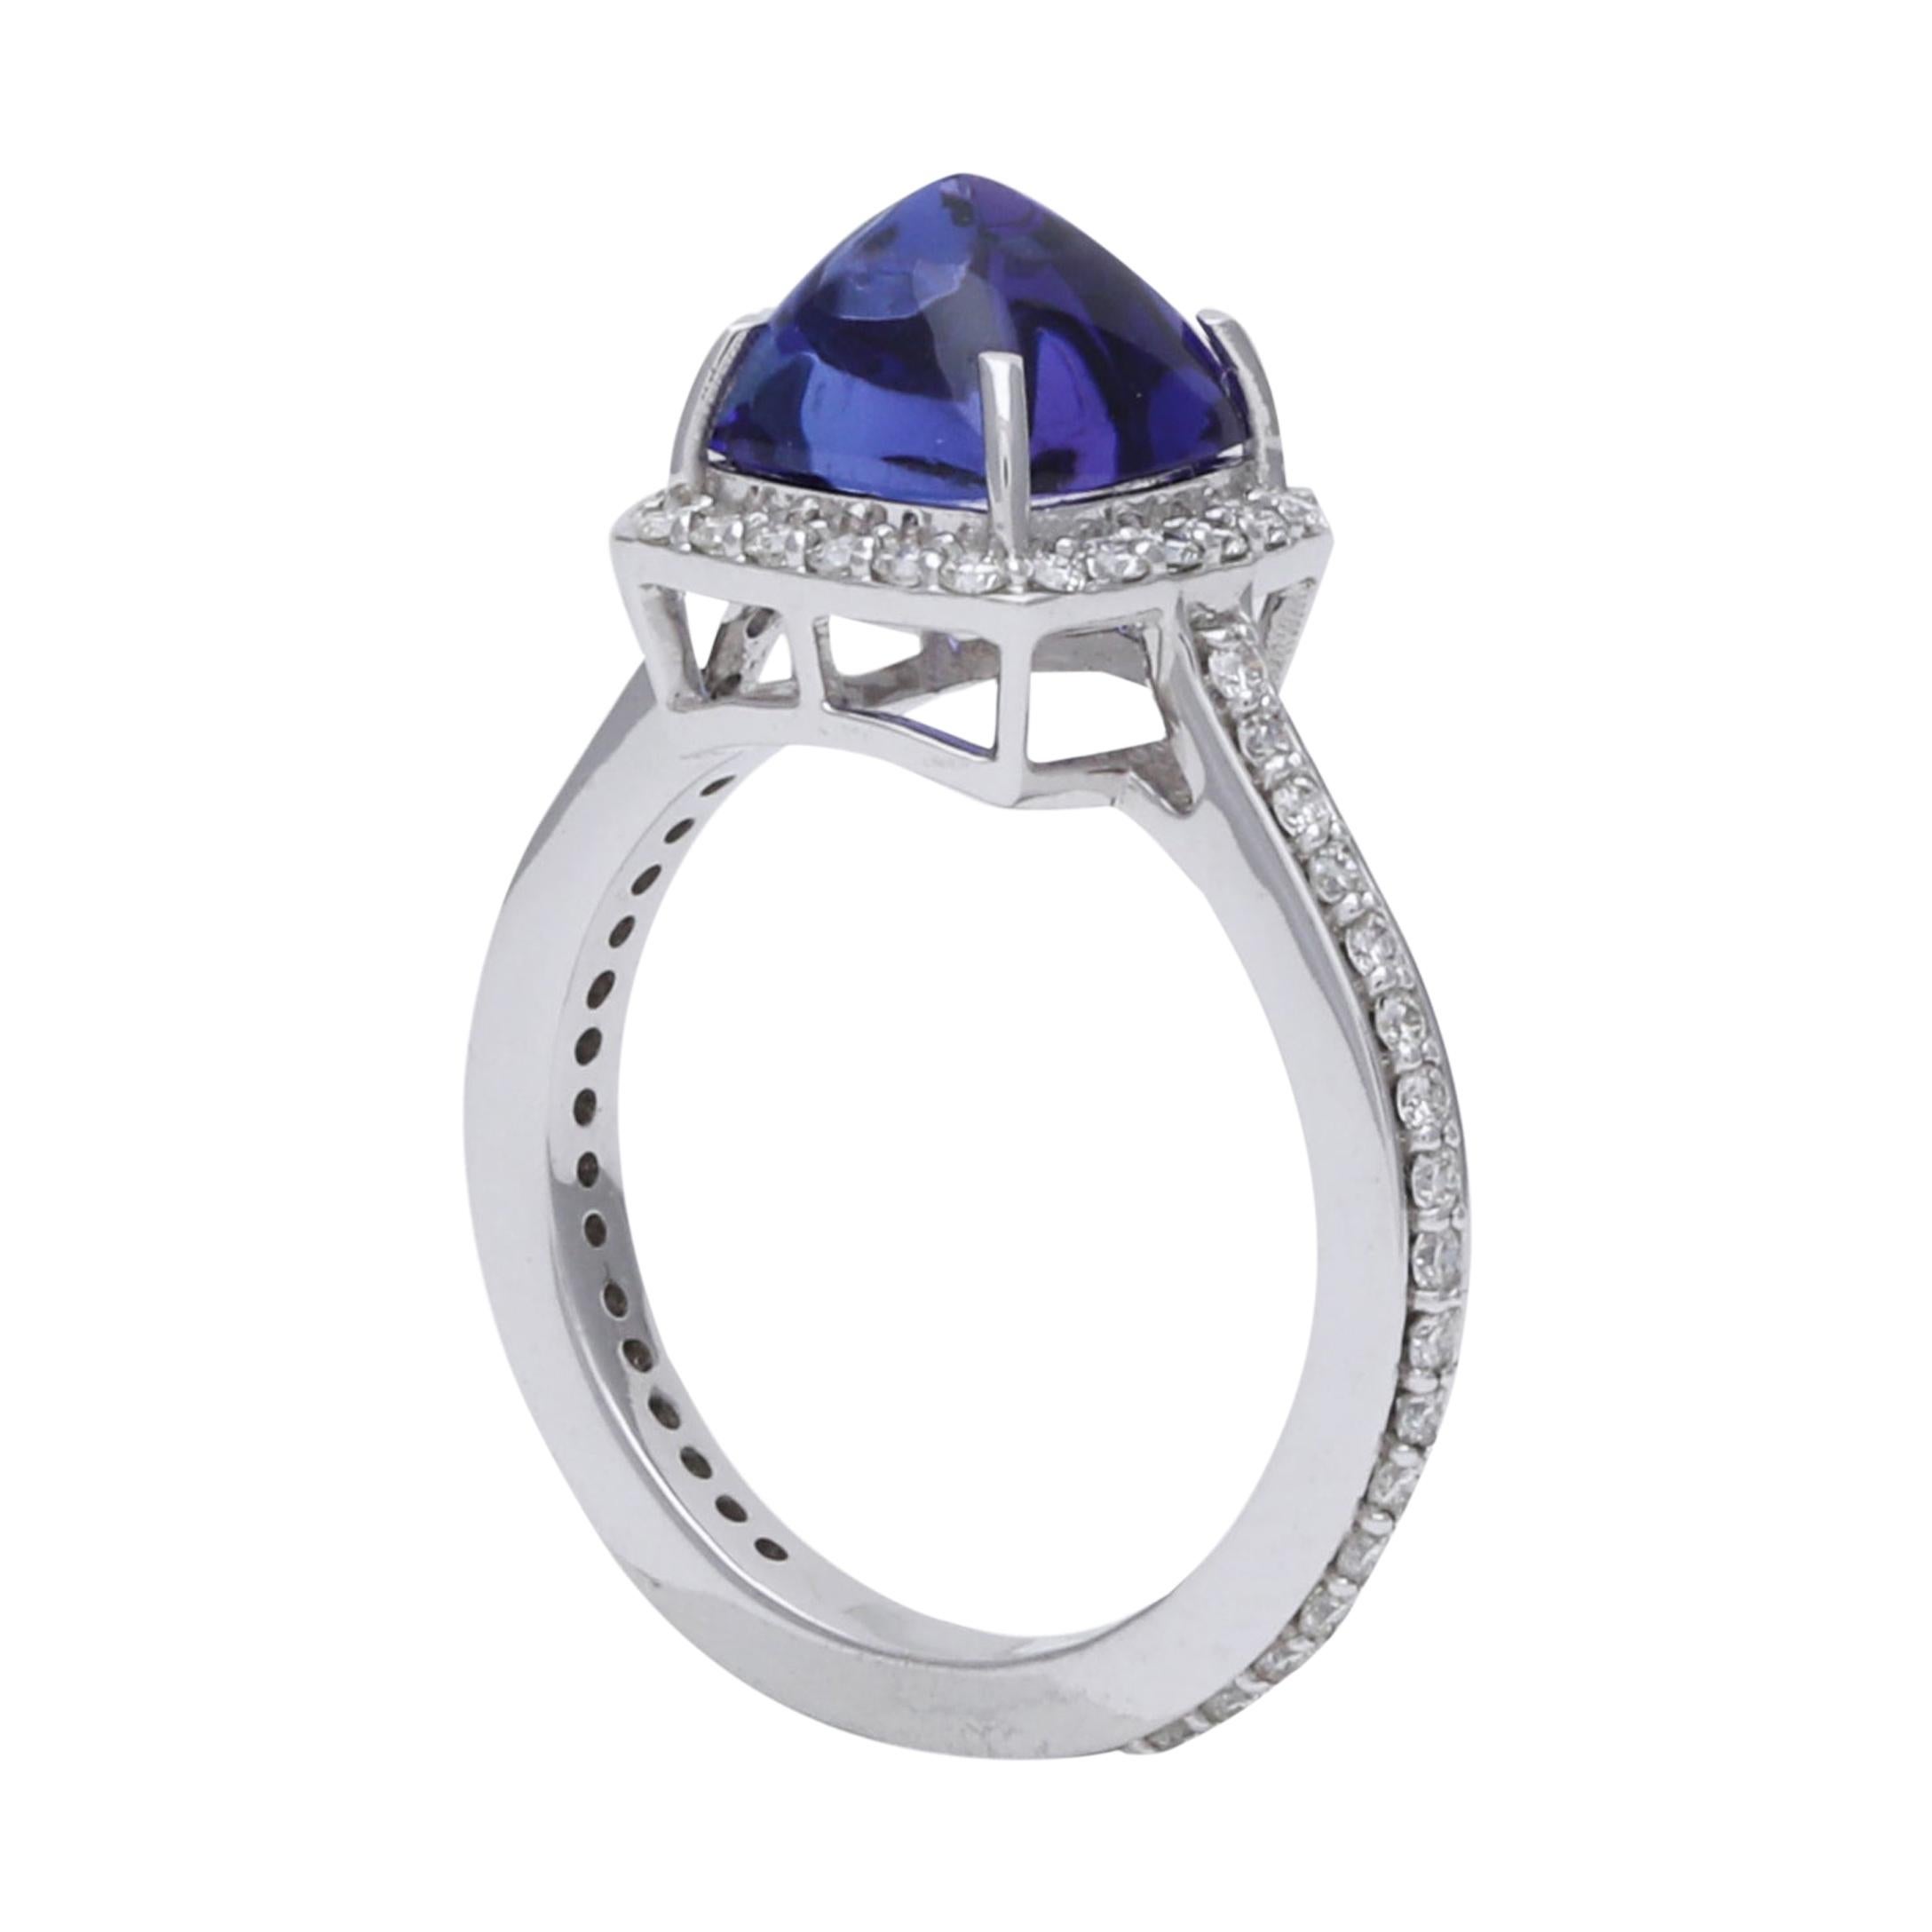 Top Quality Tanzanite Sugarloaf Cabochon Ring with Diamonds in 18 Karat Gold